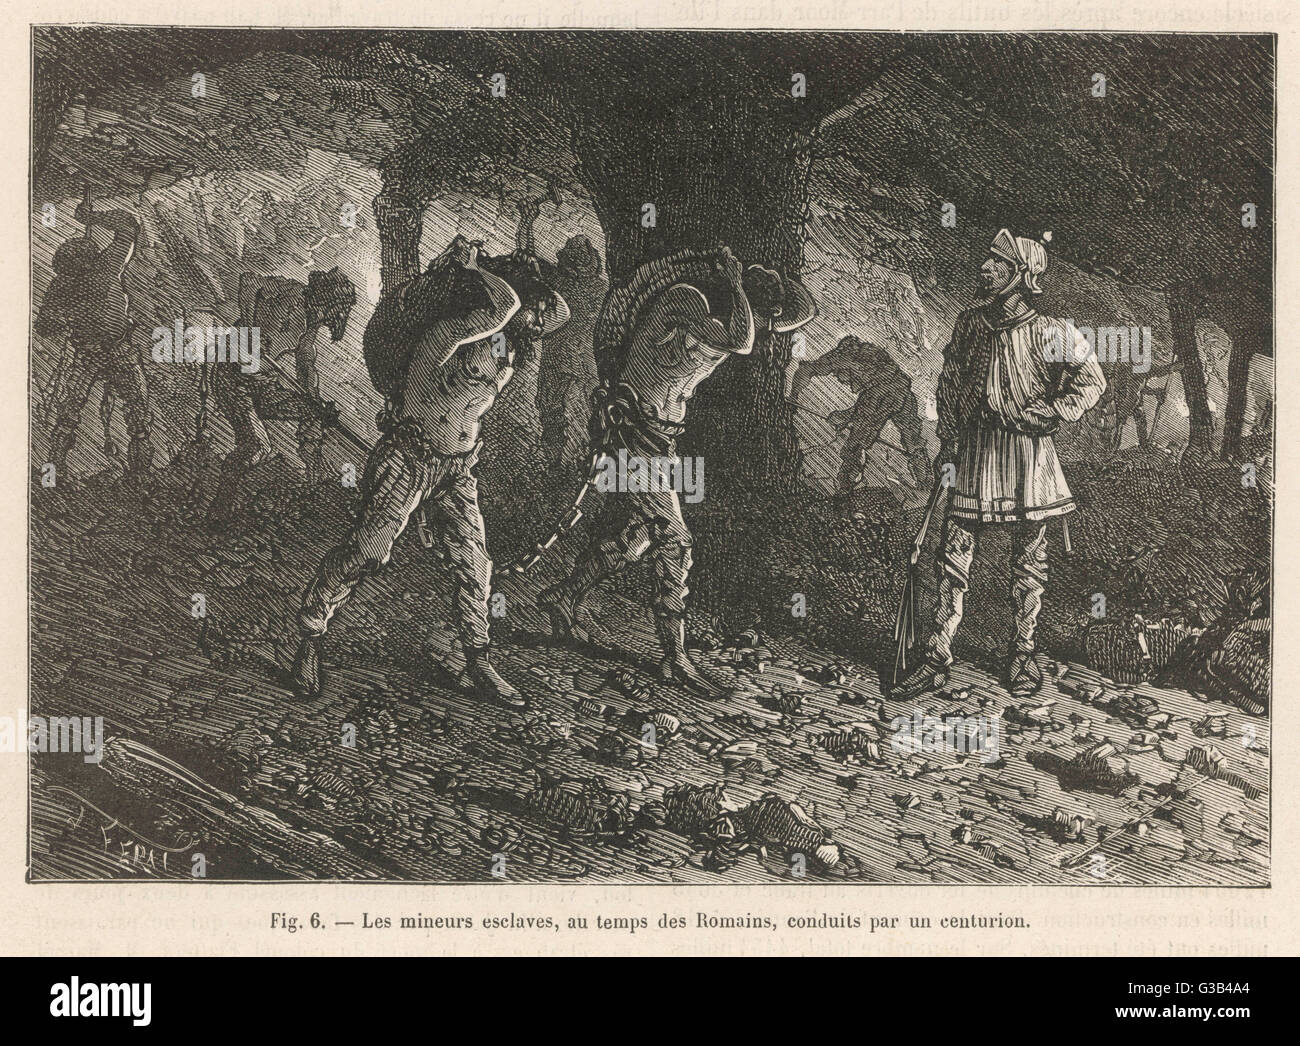 A Roman centurion supervises  Gaul slaves, chained together  and forced to work in the coal  mines. Stock Photo